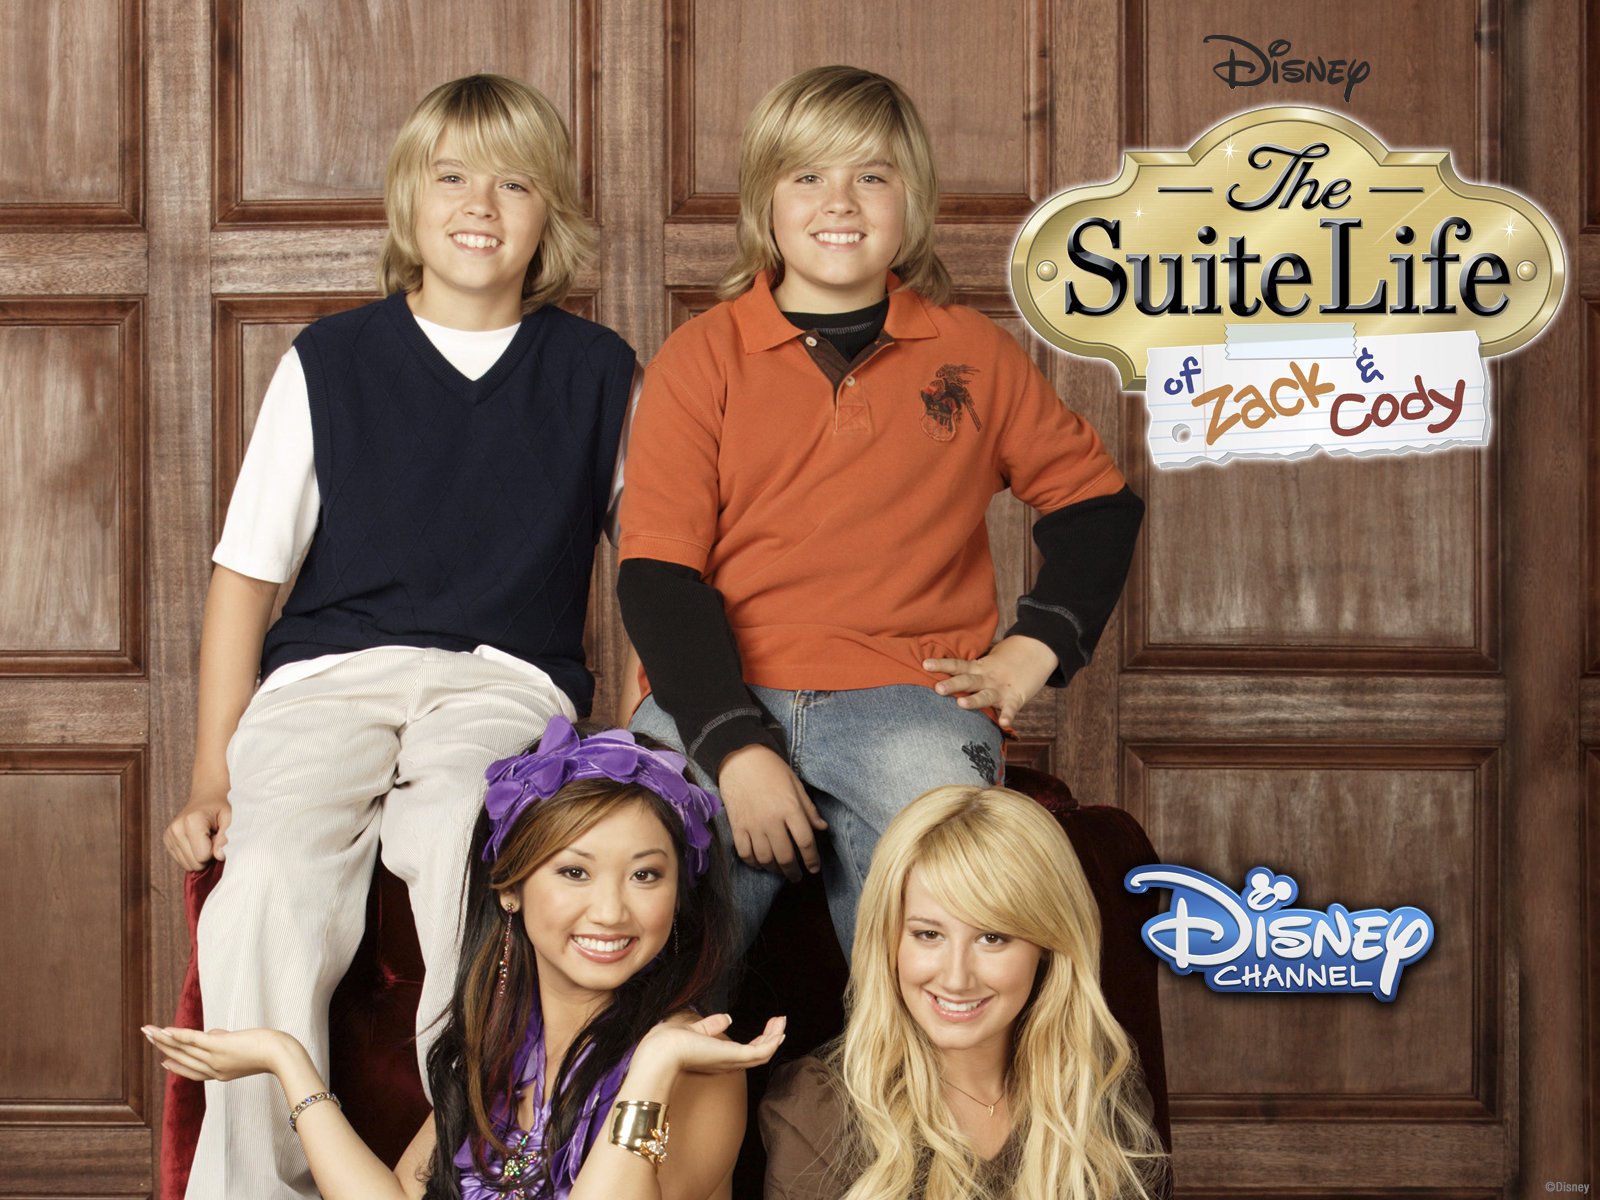 watch suite life of zack and cody season 3